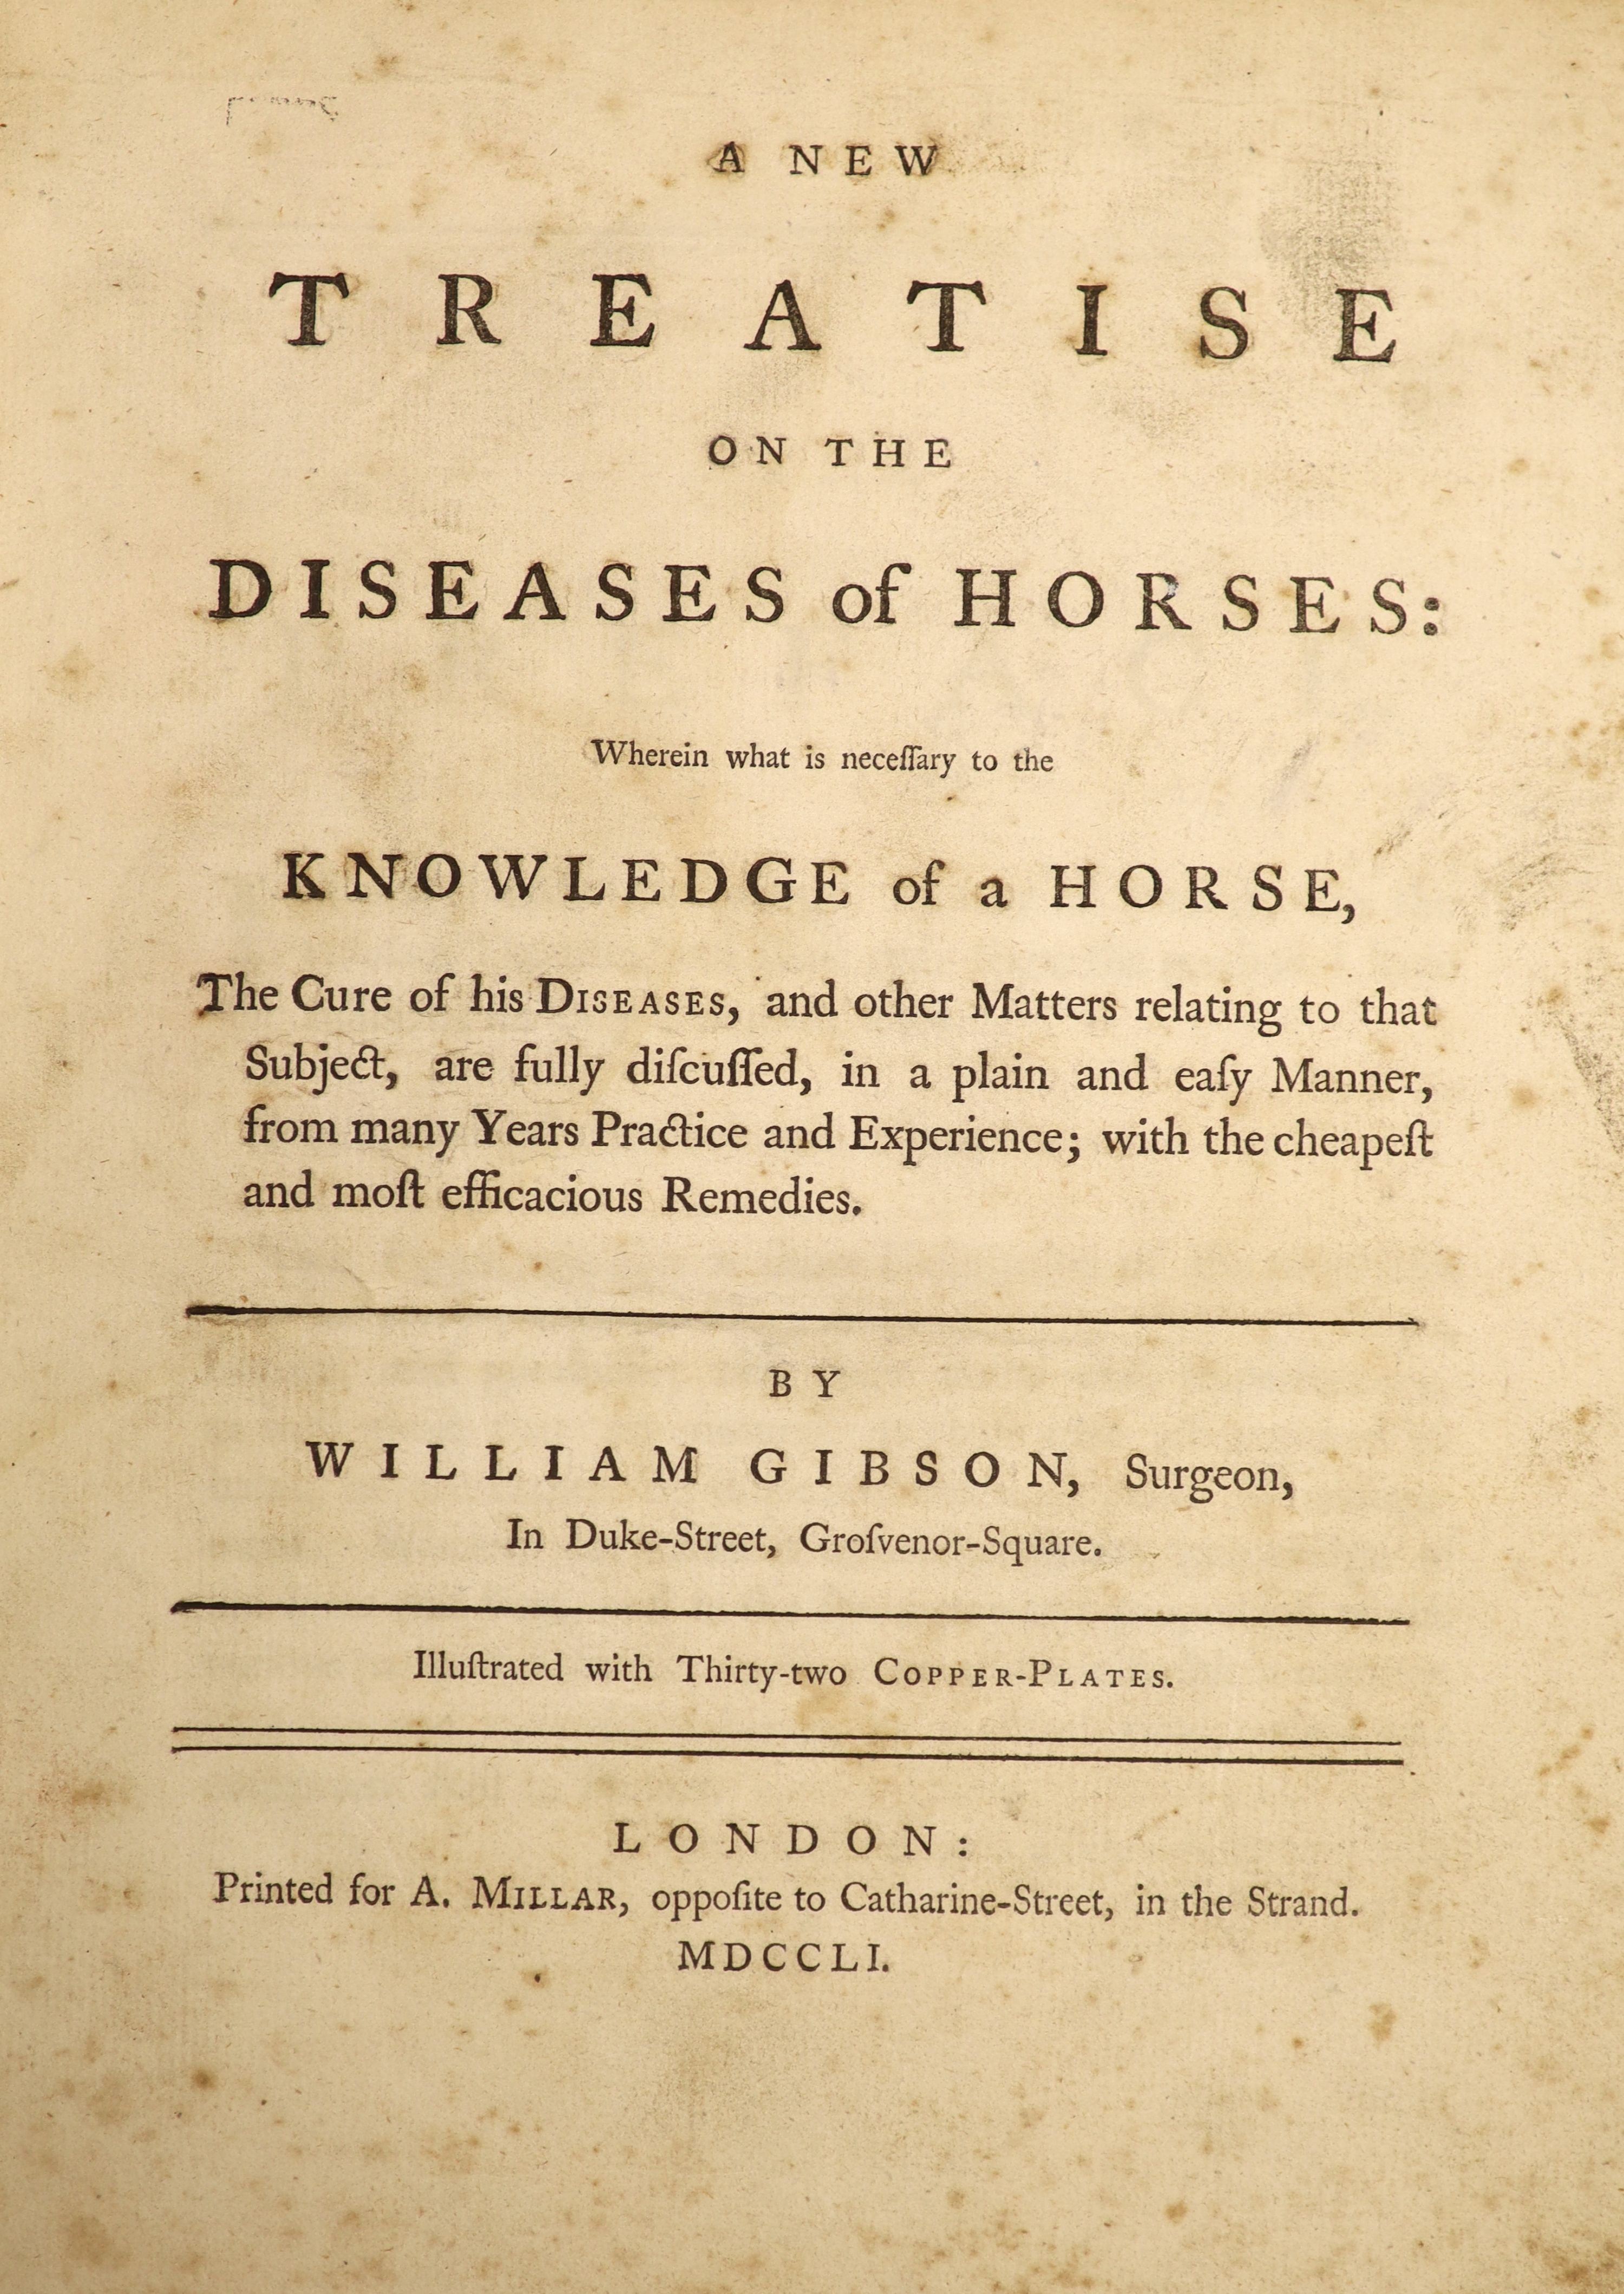 Gibson, William - A New Treatise on the Diseases of Horses, qto, later half morocco, with engraved frontispiece and 31 plates, A. Millar, London, 1751